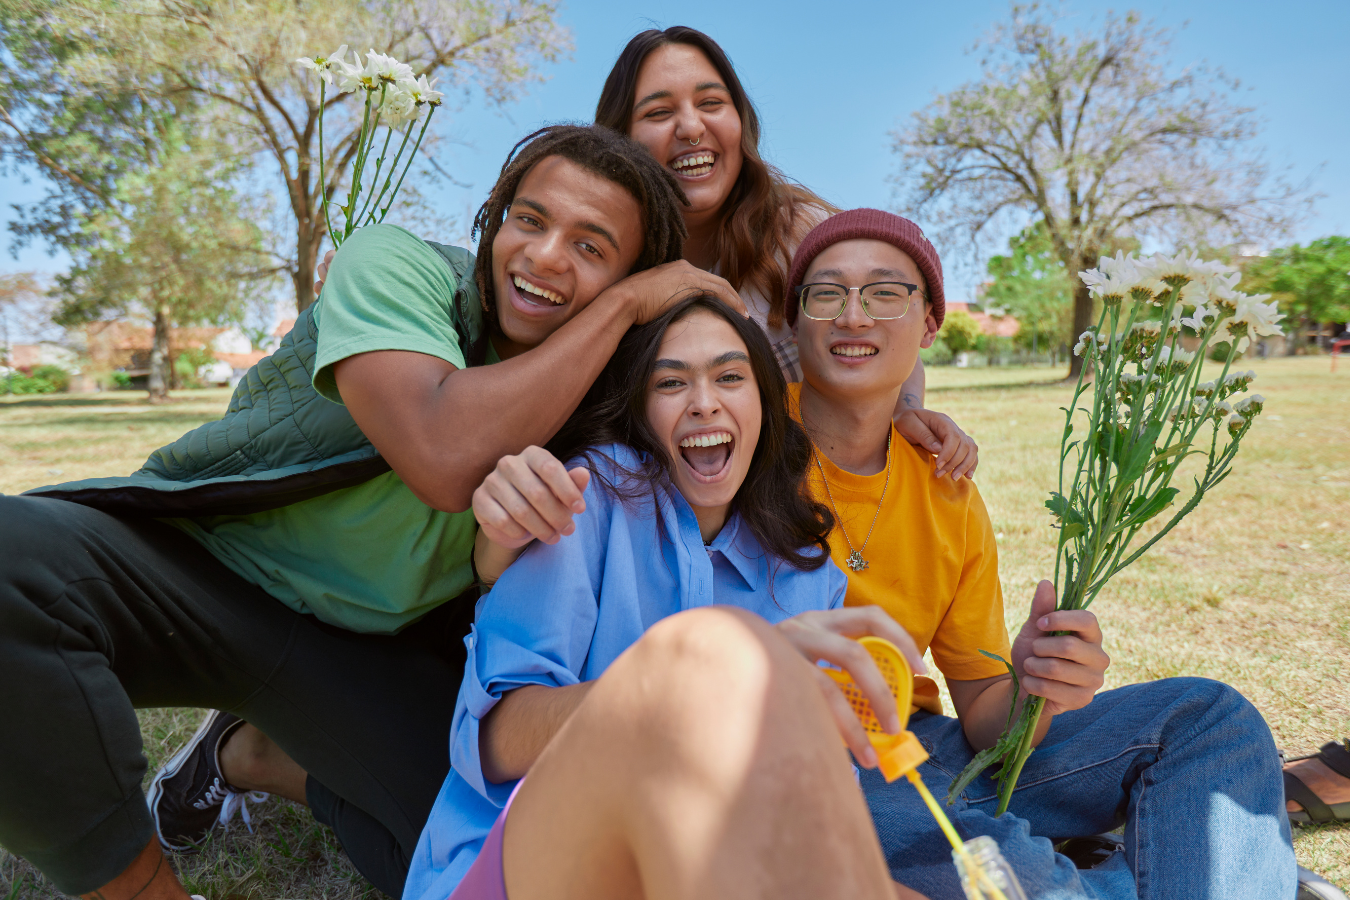 Four multicultural youth happily spending time together. Youth development centers using Sparkrock 365 ERP are more efficient, allowing increased focus on youth development and community building.